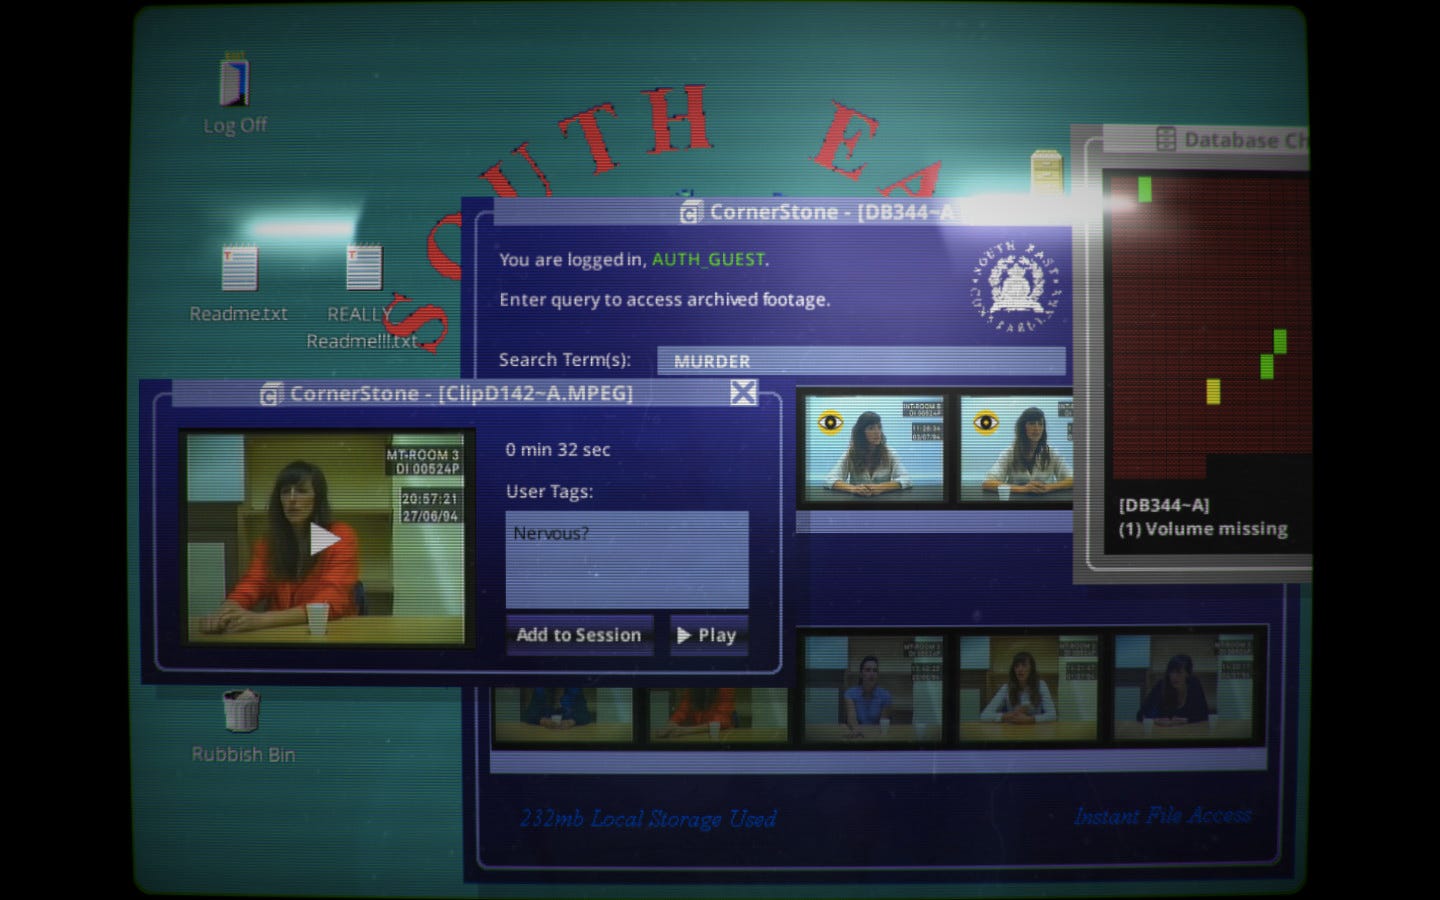 A 1990s-style computer desktop screen, with several windows open. One is a search window where the term "MURDER" has been entered, and various photo thumbnails of a woman being interviewed are lined up below. A smaller window shows a larger preview of one of the thumbnails, and a box labeled "User Tags" has been edited to say "Nervous?"